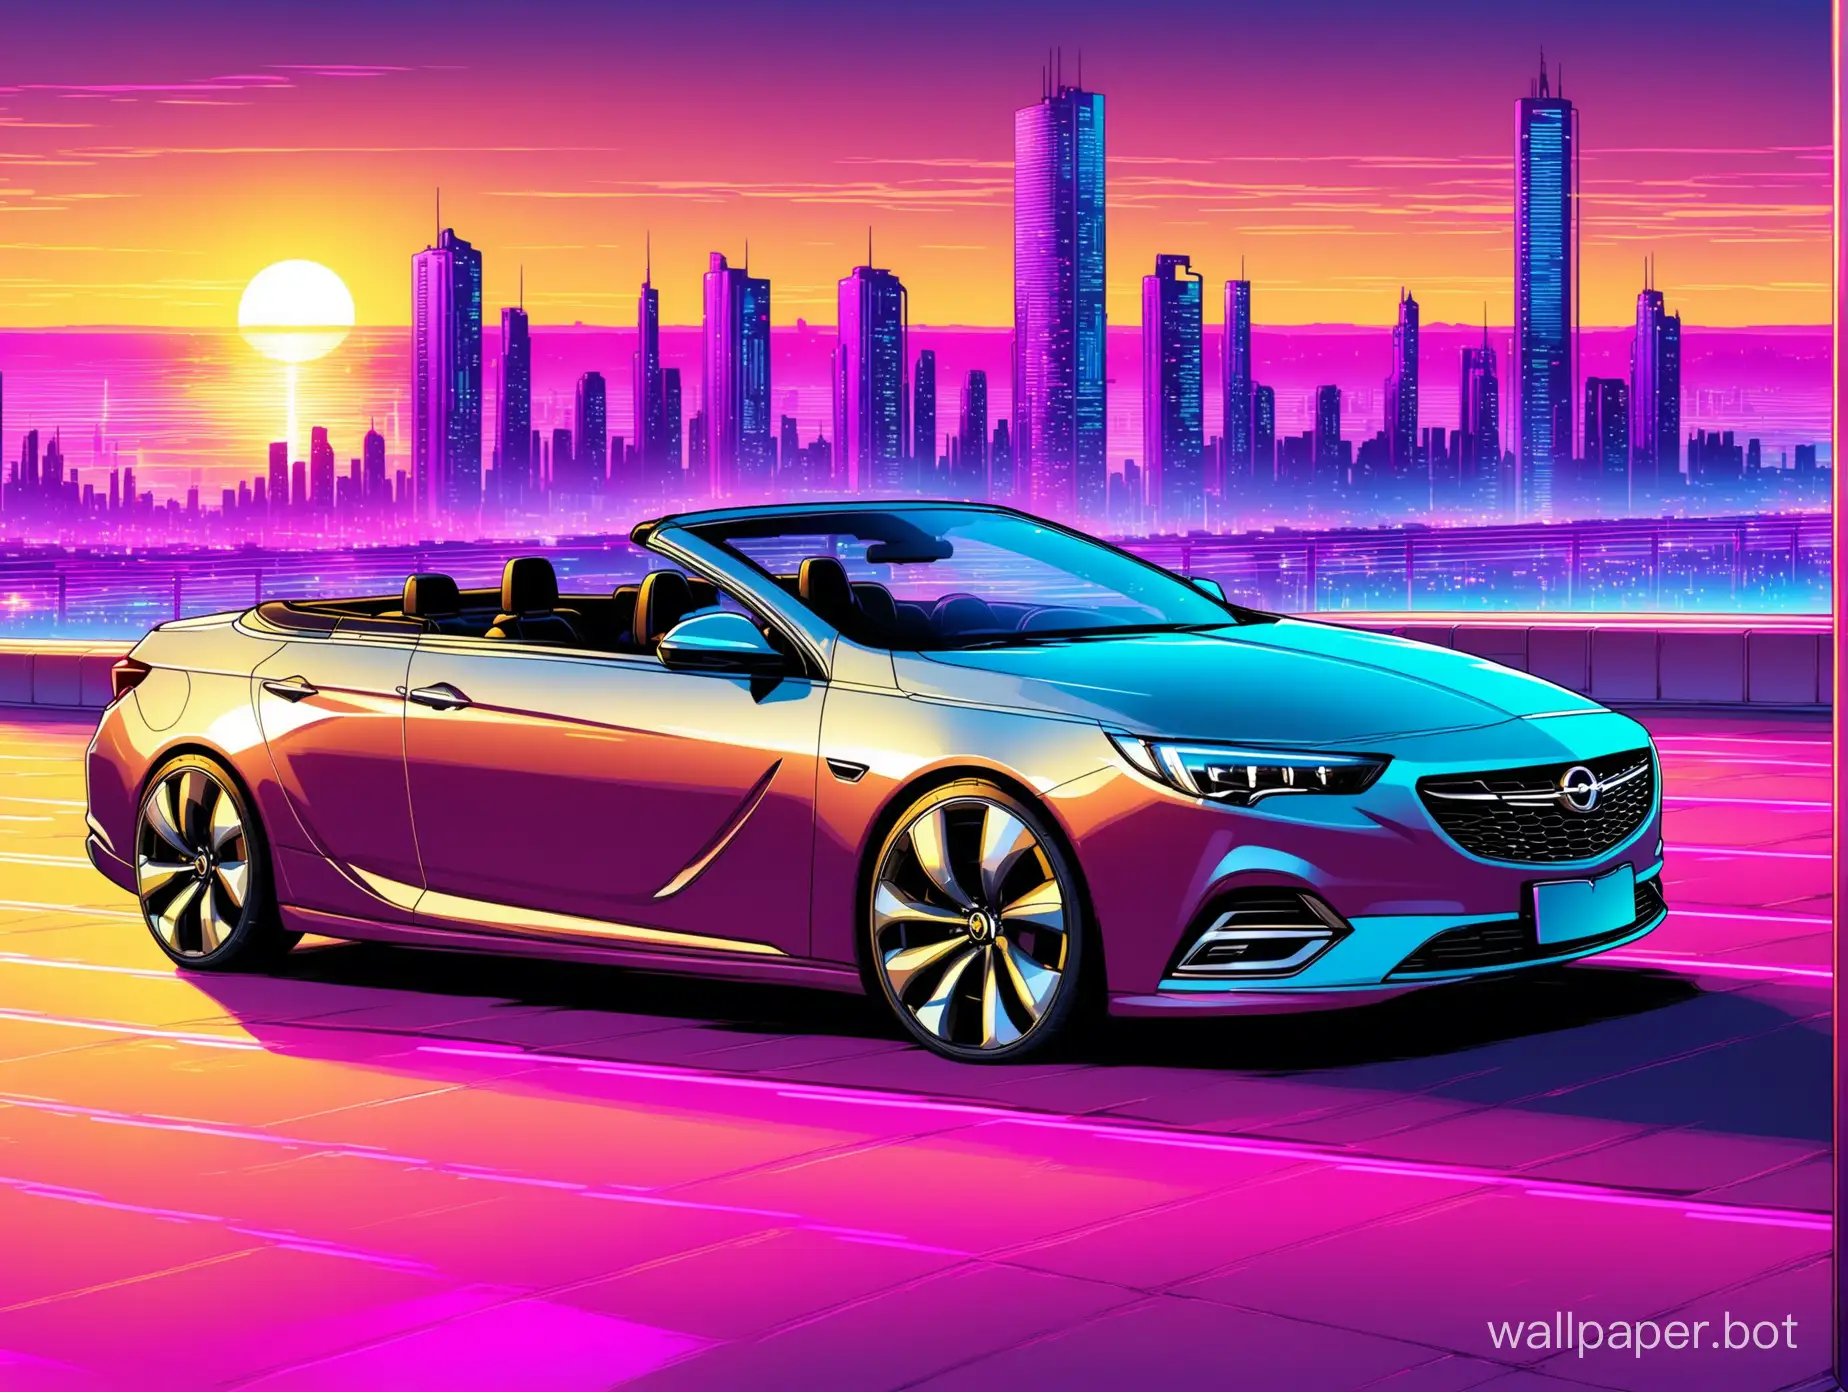 Futuristic-Steel-Opel-Insignia-Grand-Sport-Convertible-in-Synthwave-Cityscape-Sunset